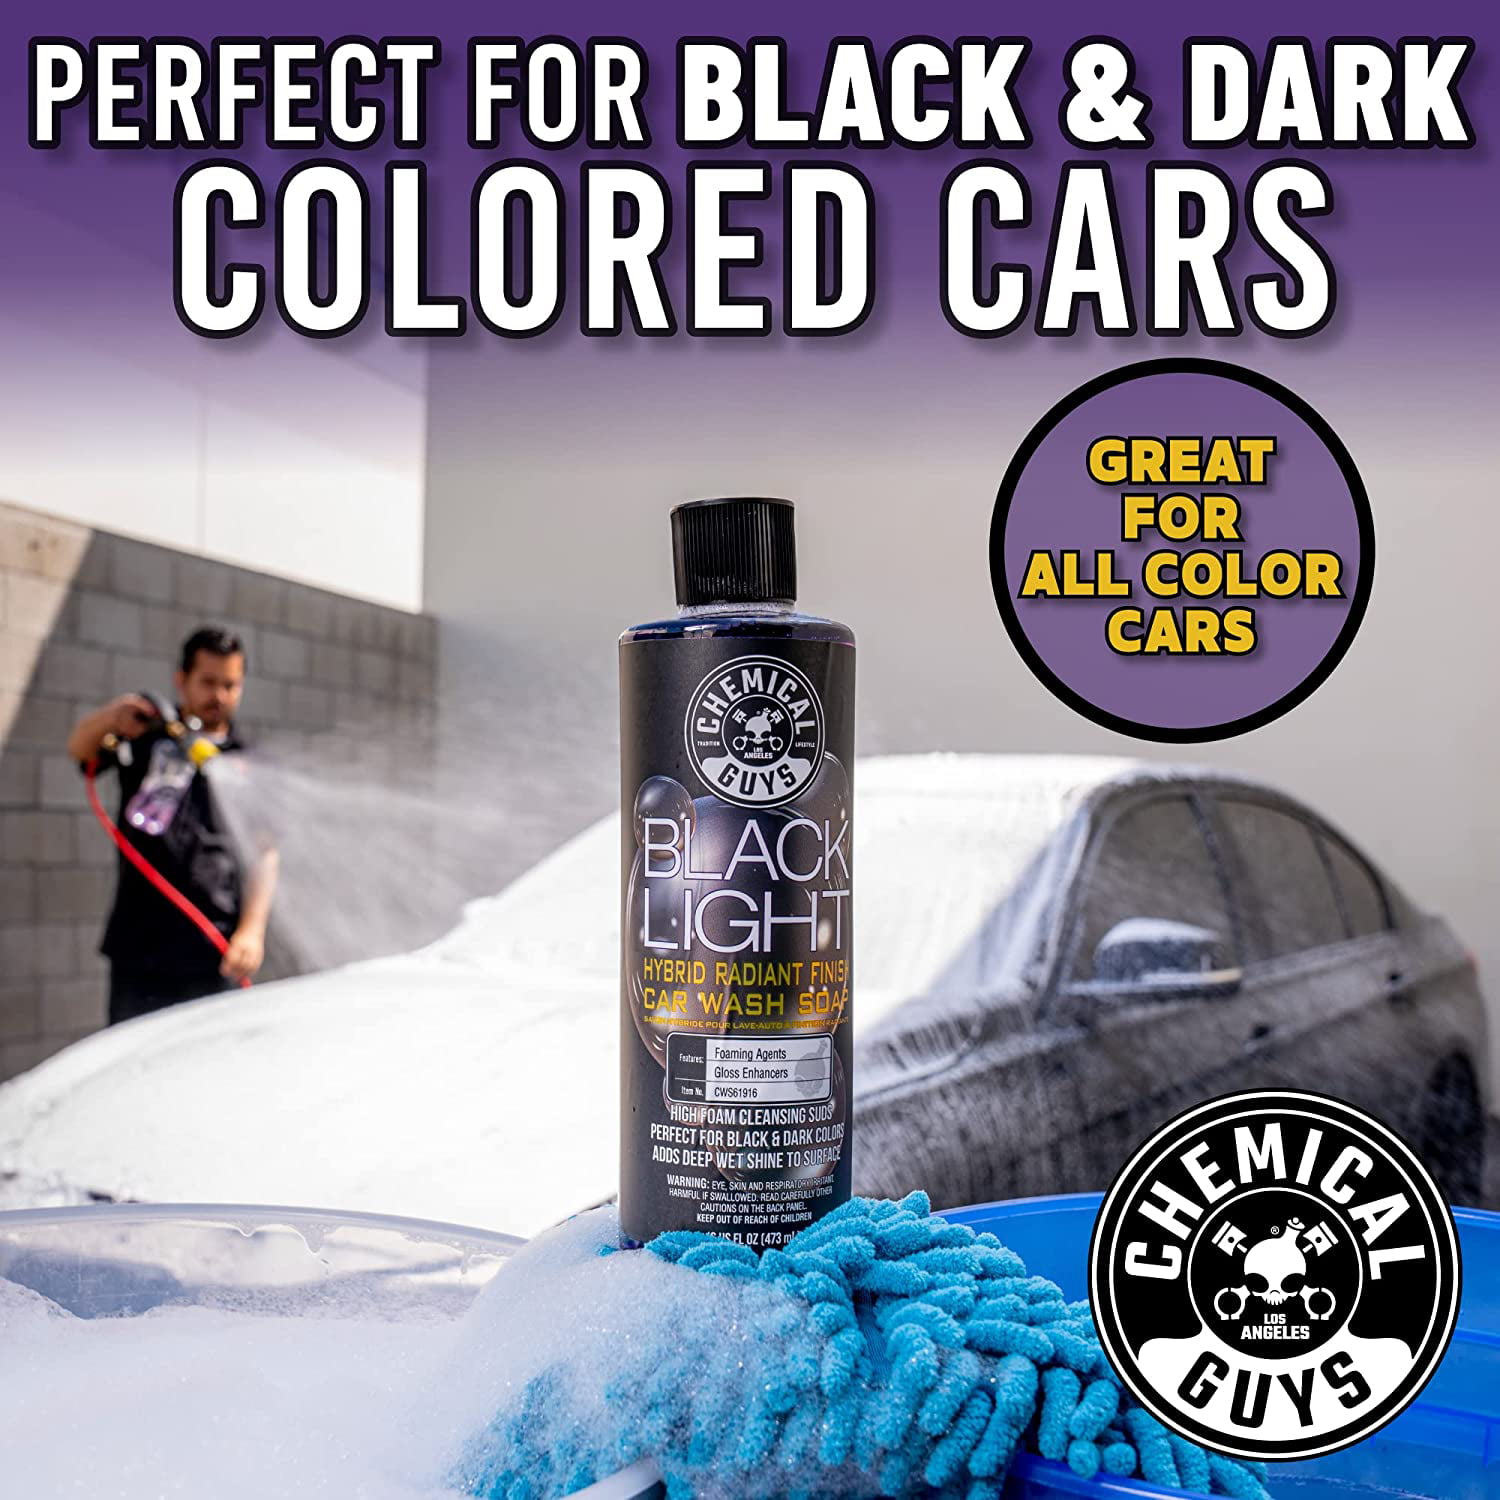 Chemical Guys - Take your dark colored vehicle to new